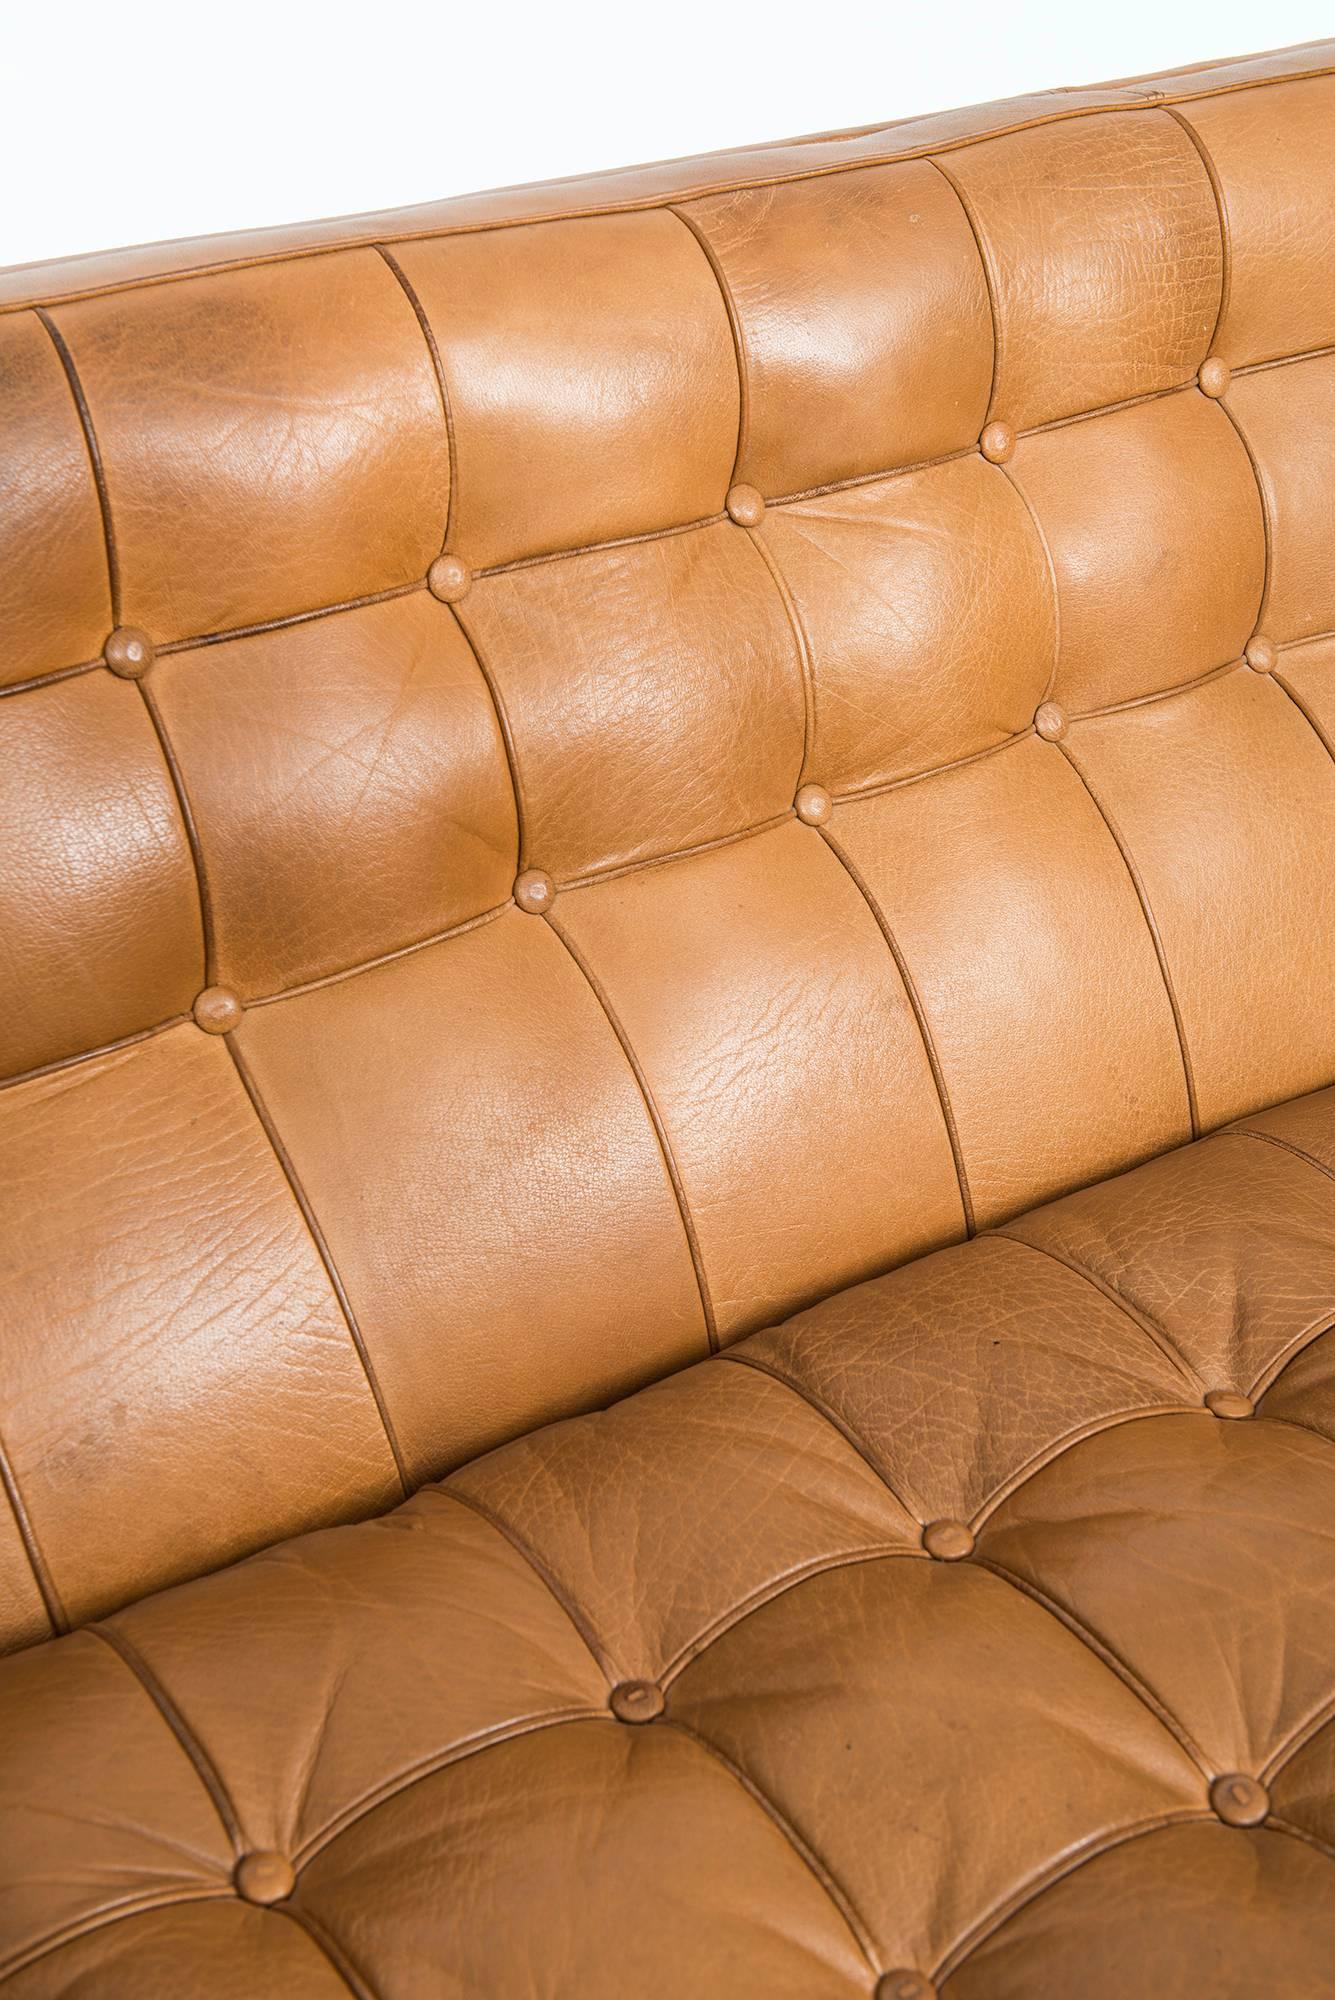 Swedish Arne Norell Merkur sofa in cognac brown leather by Norell AB in Sweden